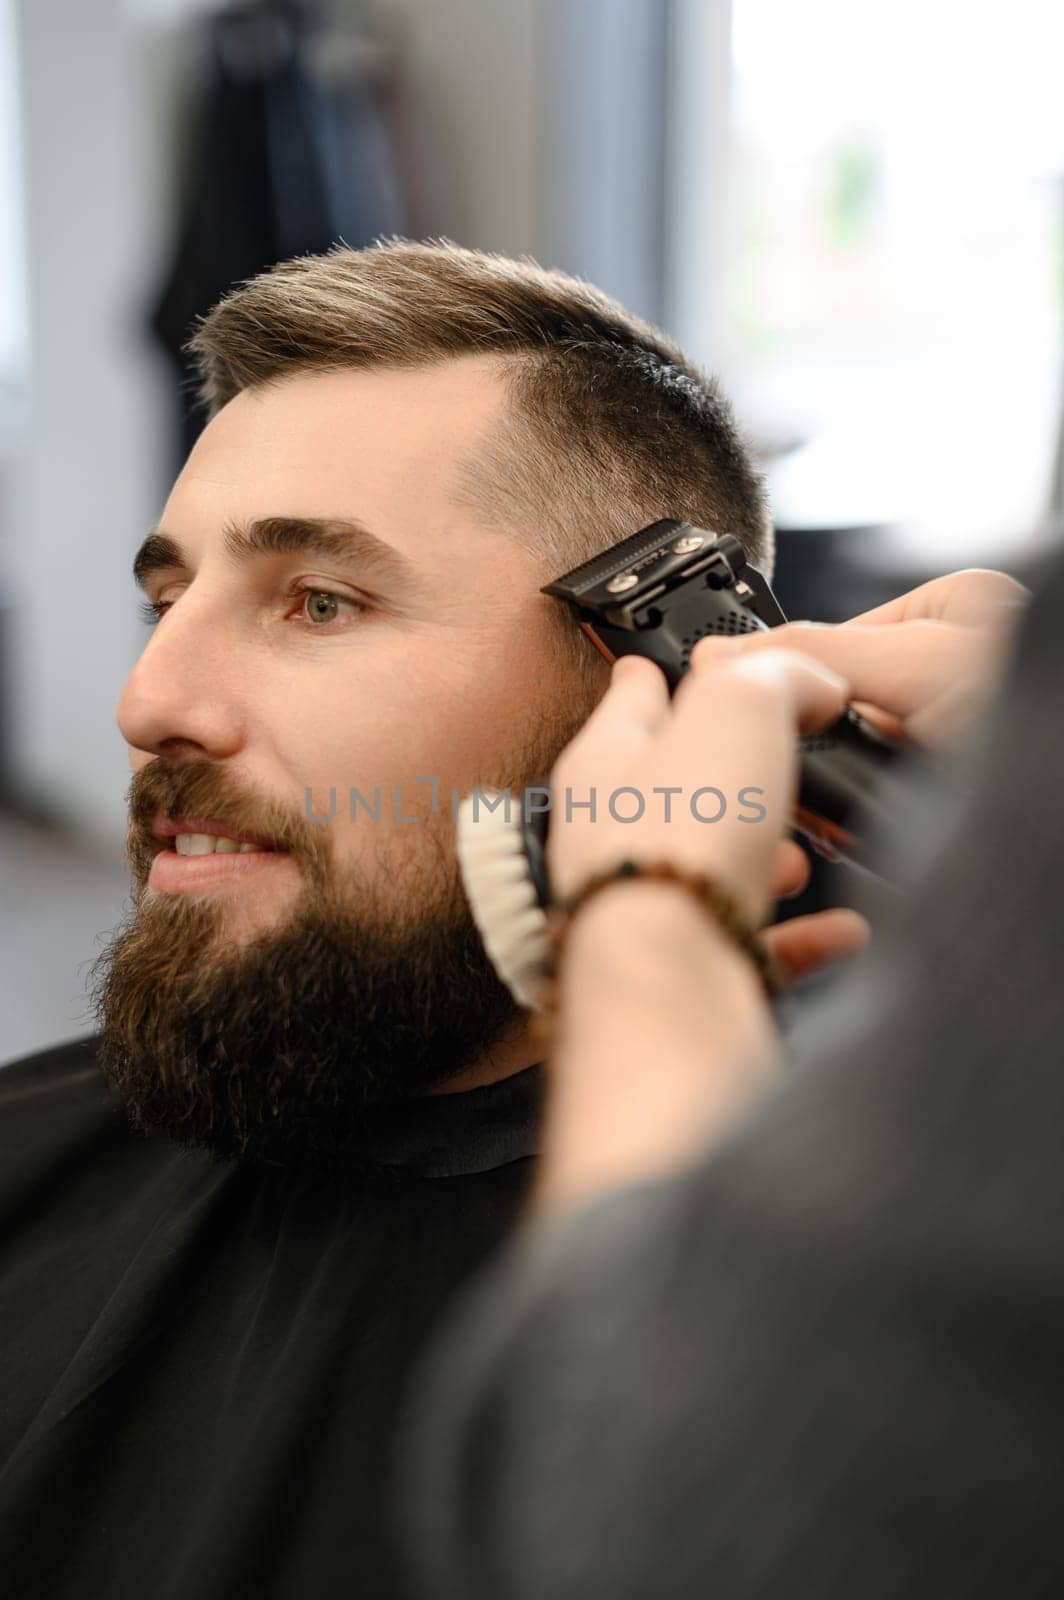 Barber shaves the contour of the oval line with a clipper on the clients head. A man with a beard gets a haircut in a barbershop chair.